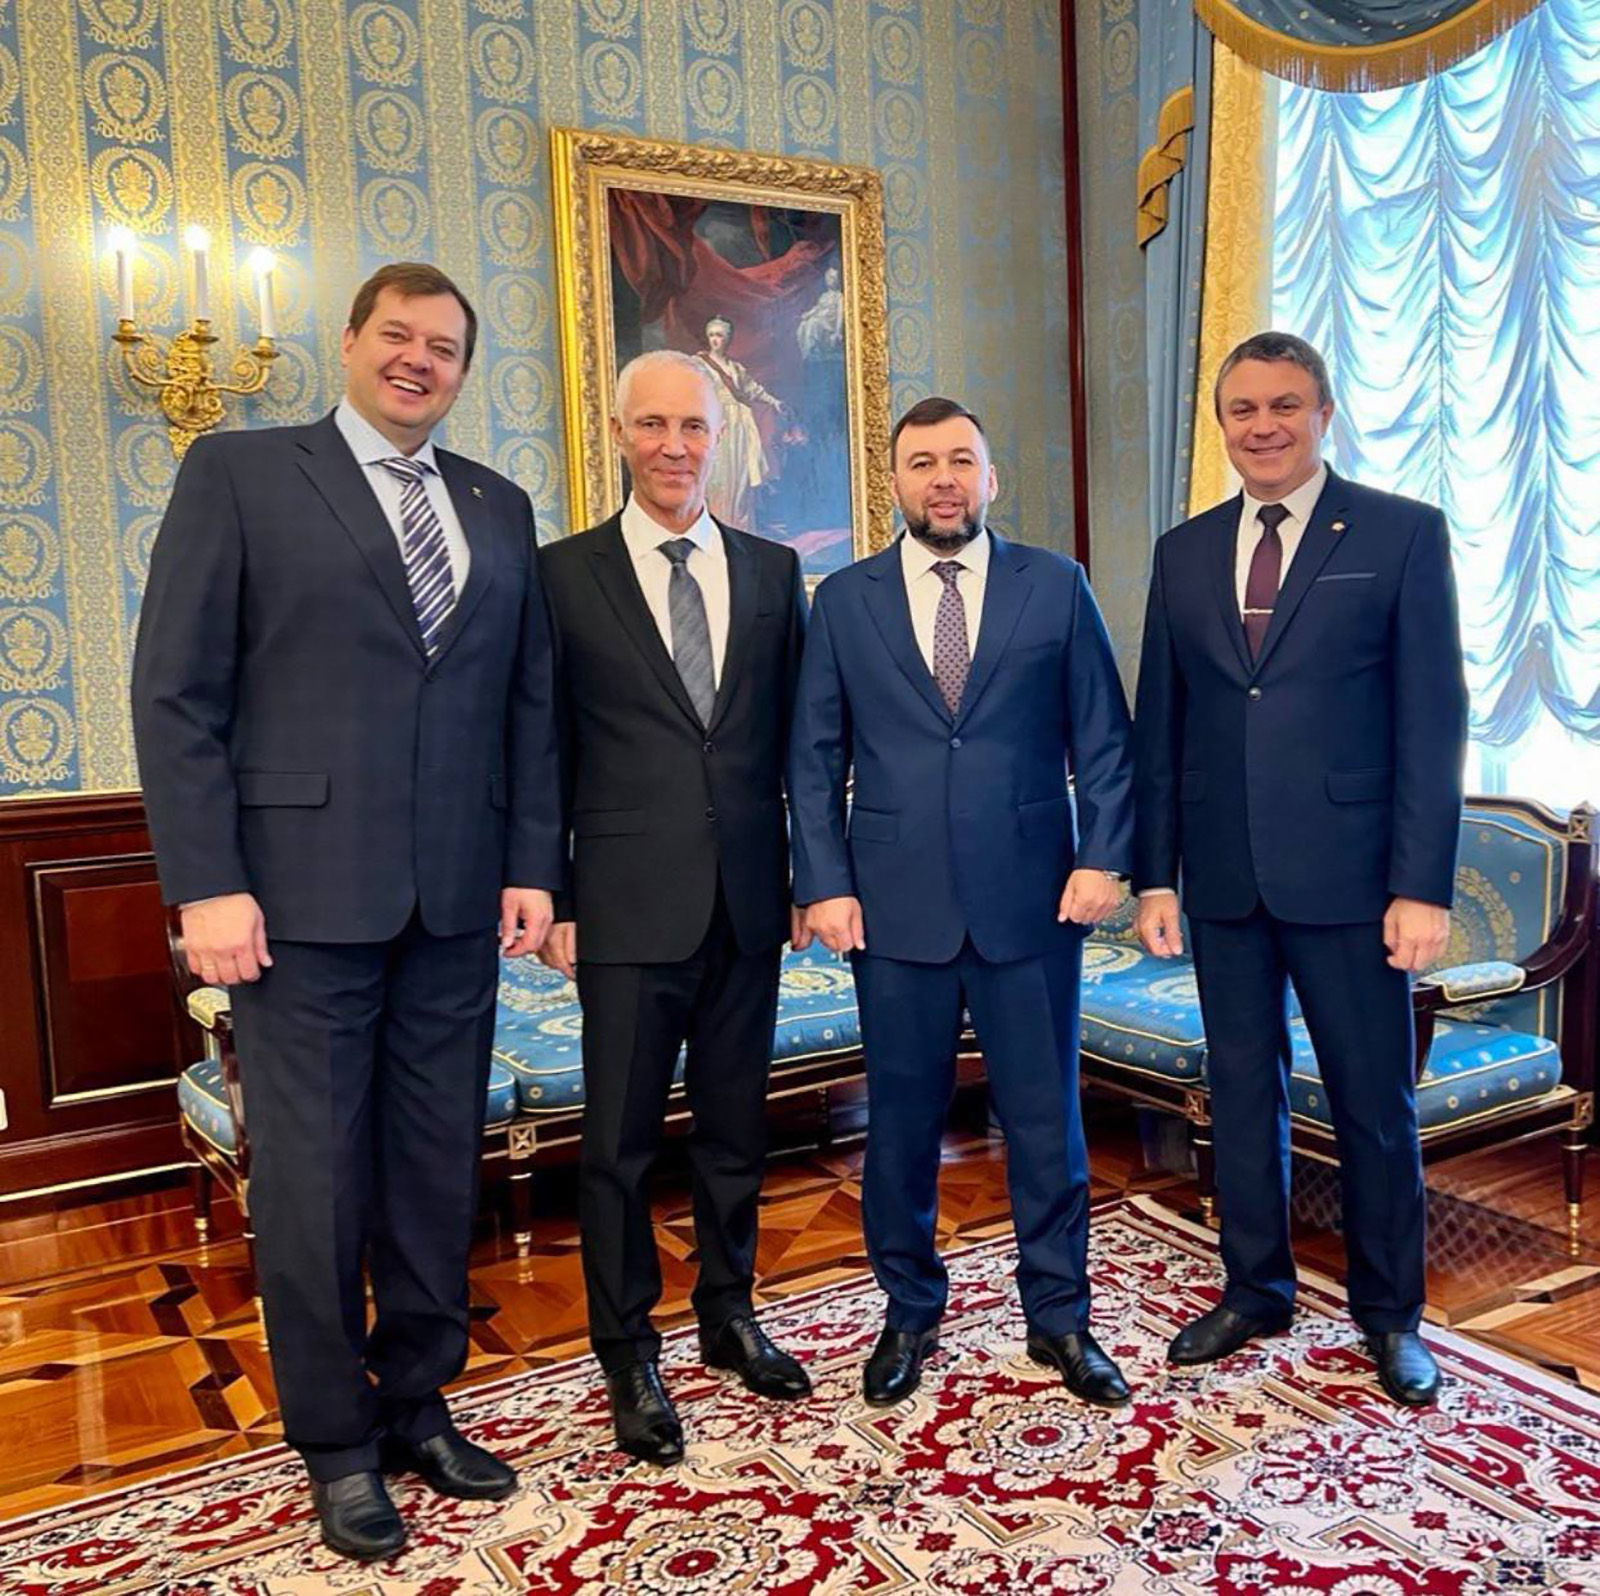 The head of the Russian-backed administration in occupied parts of Zaporizhzhia, Yevgeny Balitsky, has shared a photo of himself (far left) alongside (from left to right) Vladimir Saldo, Denis Pushilin, and Leonid Pasechnik, in Moscow on September 30.